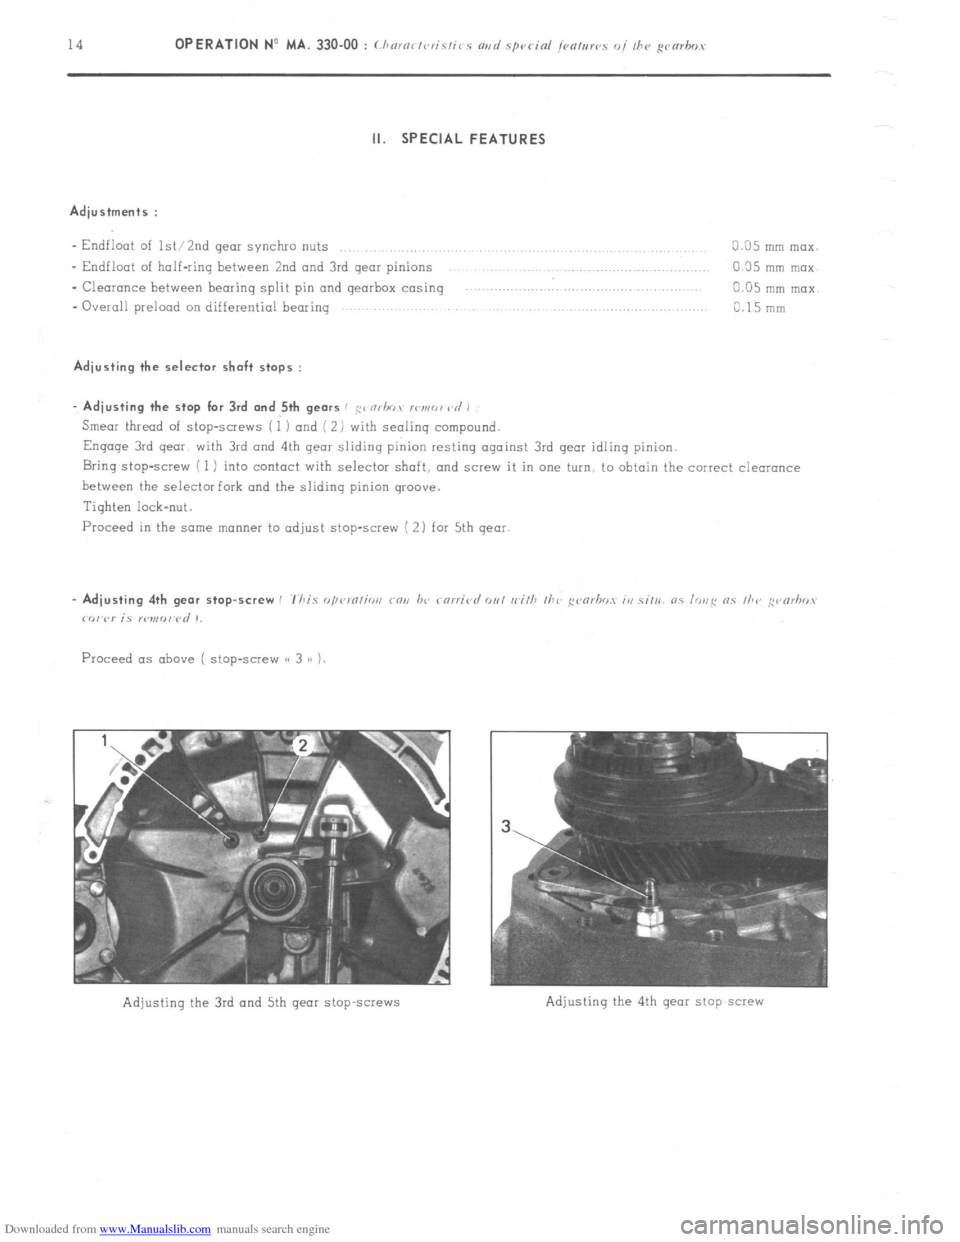 Citroen CX 1980 1.G Workshop Manual Downloaded from www.Manualslib.com manuals search engine ii. SPECIAL FEATURES 
Adjustments : 
- Endfloat of lW2nd gear synchio nuts 
0.05 mm max. 
- Endfloot of half-ring between 2nd and 3rd gear pini